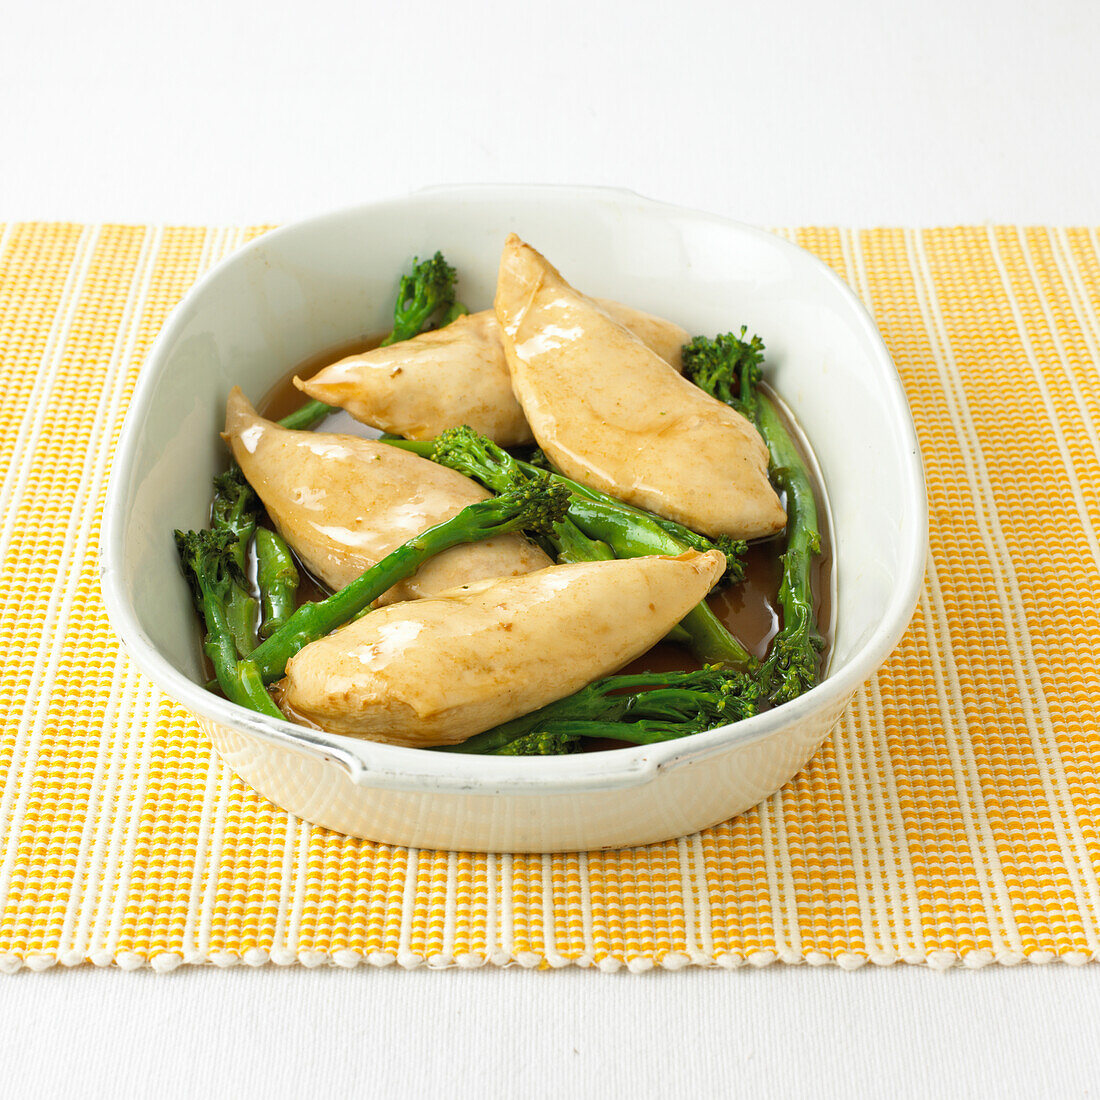 Chicken with broccoli soy anise